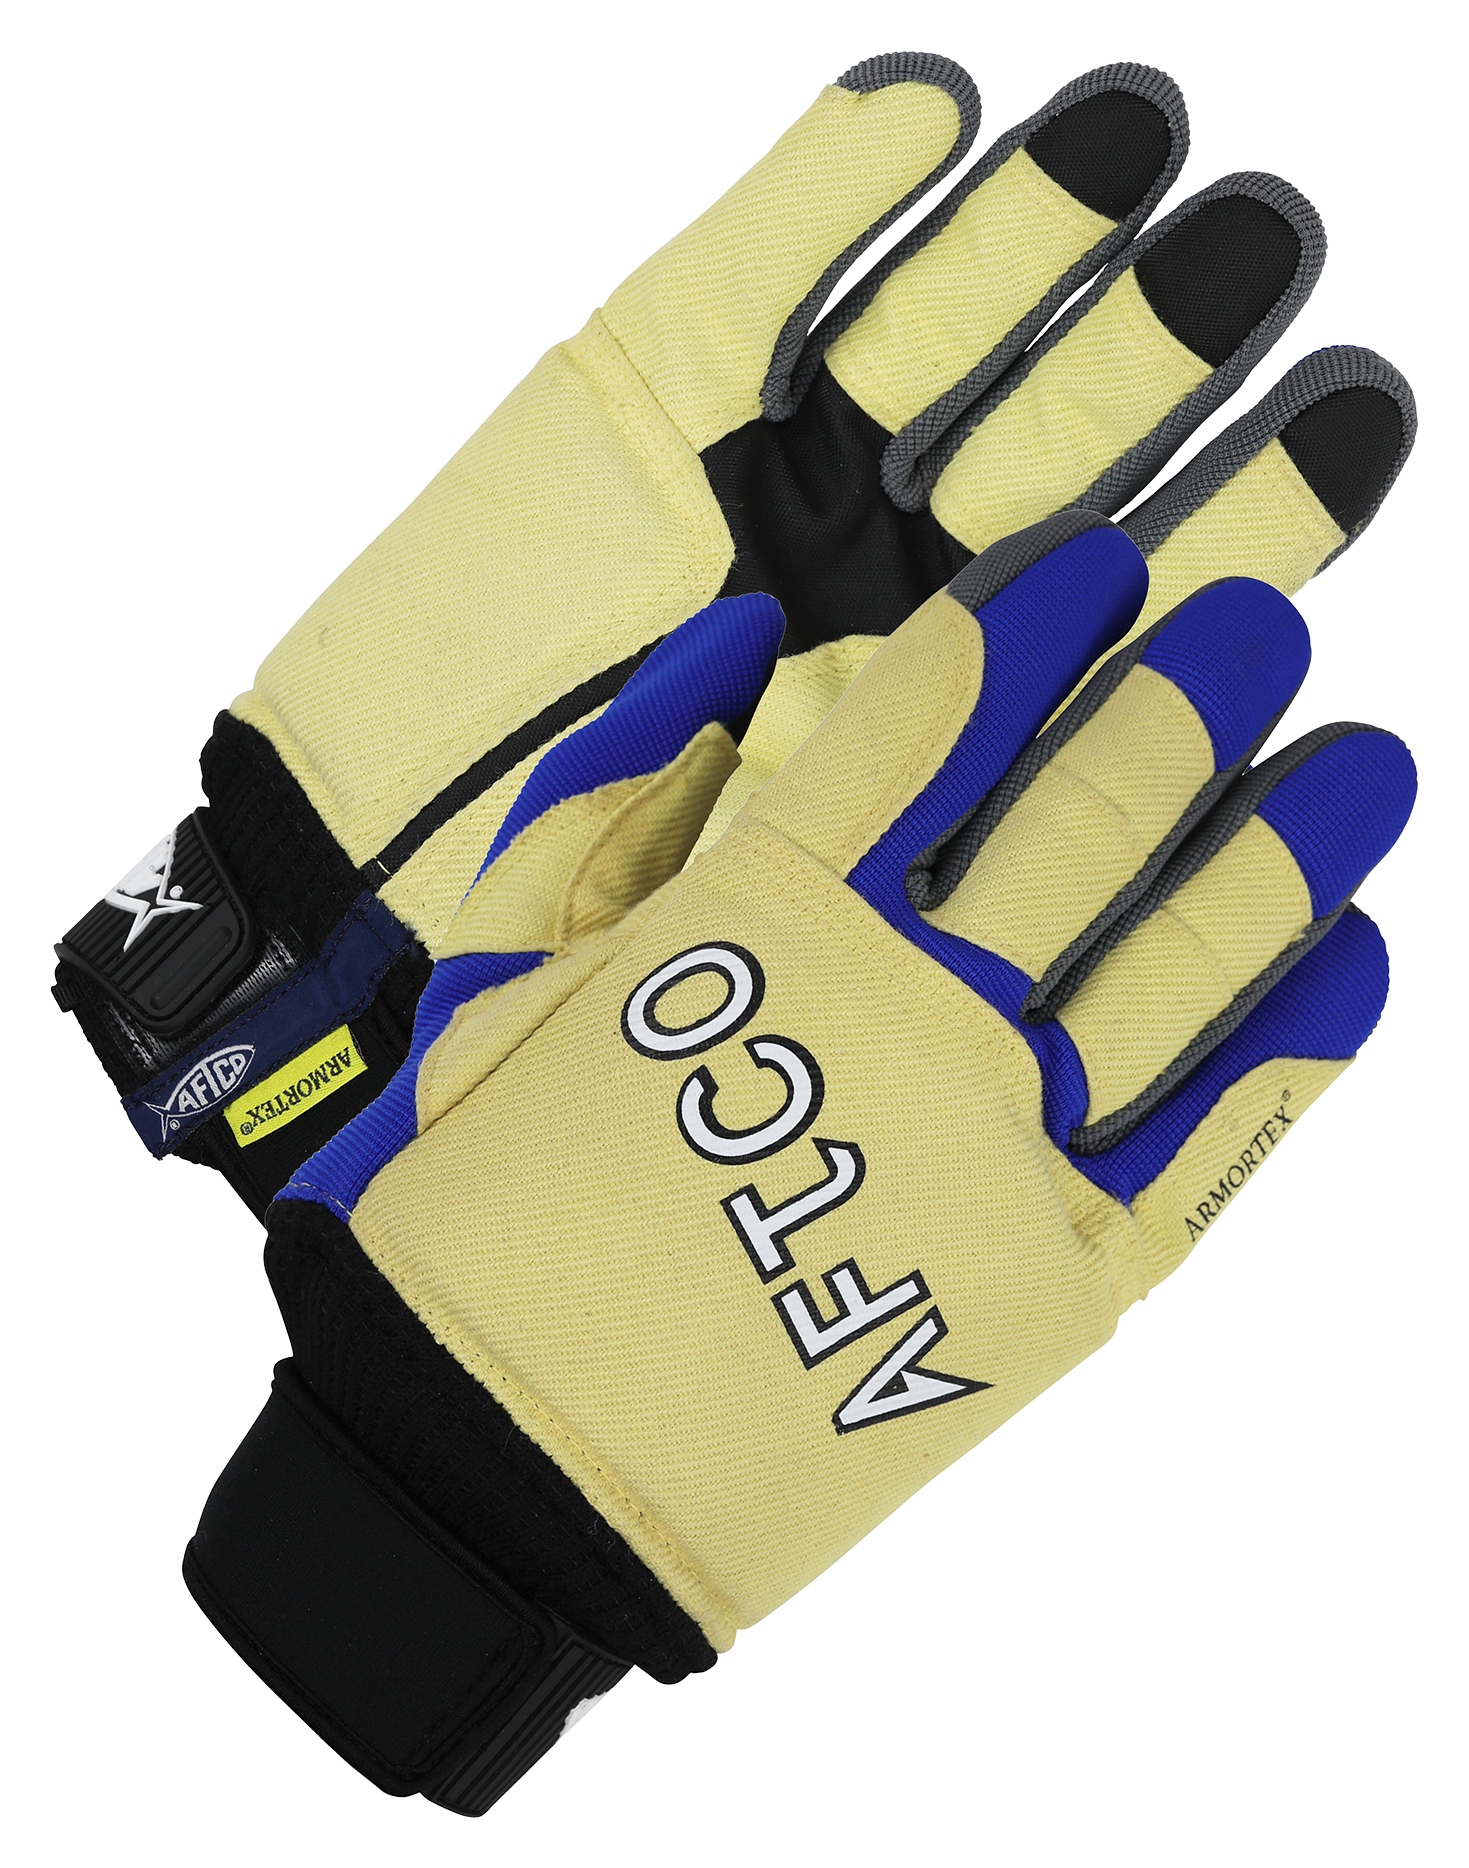 AFTCO JigPro Jigging Gloves – Crook and Crook Fishing, Electronics